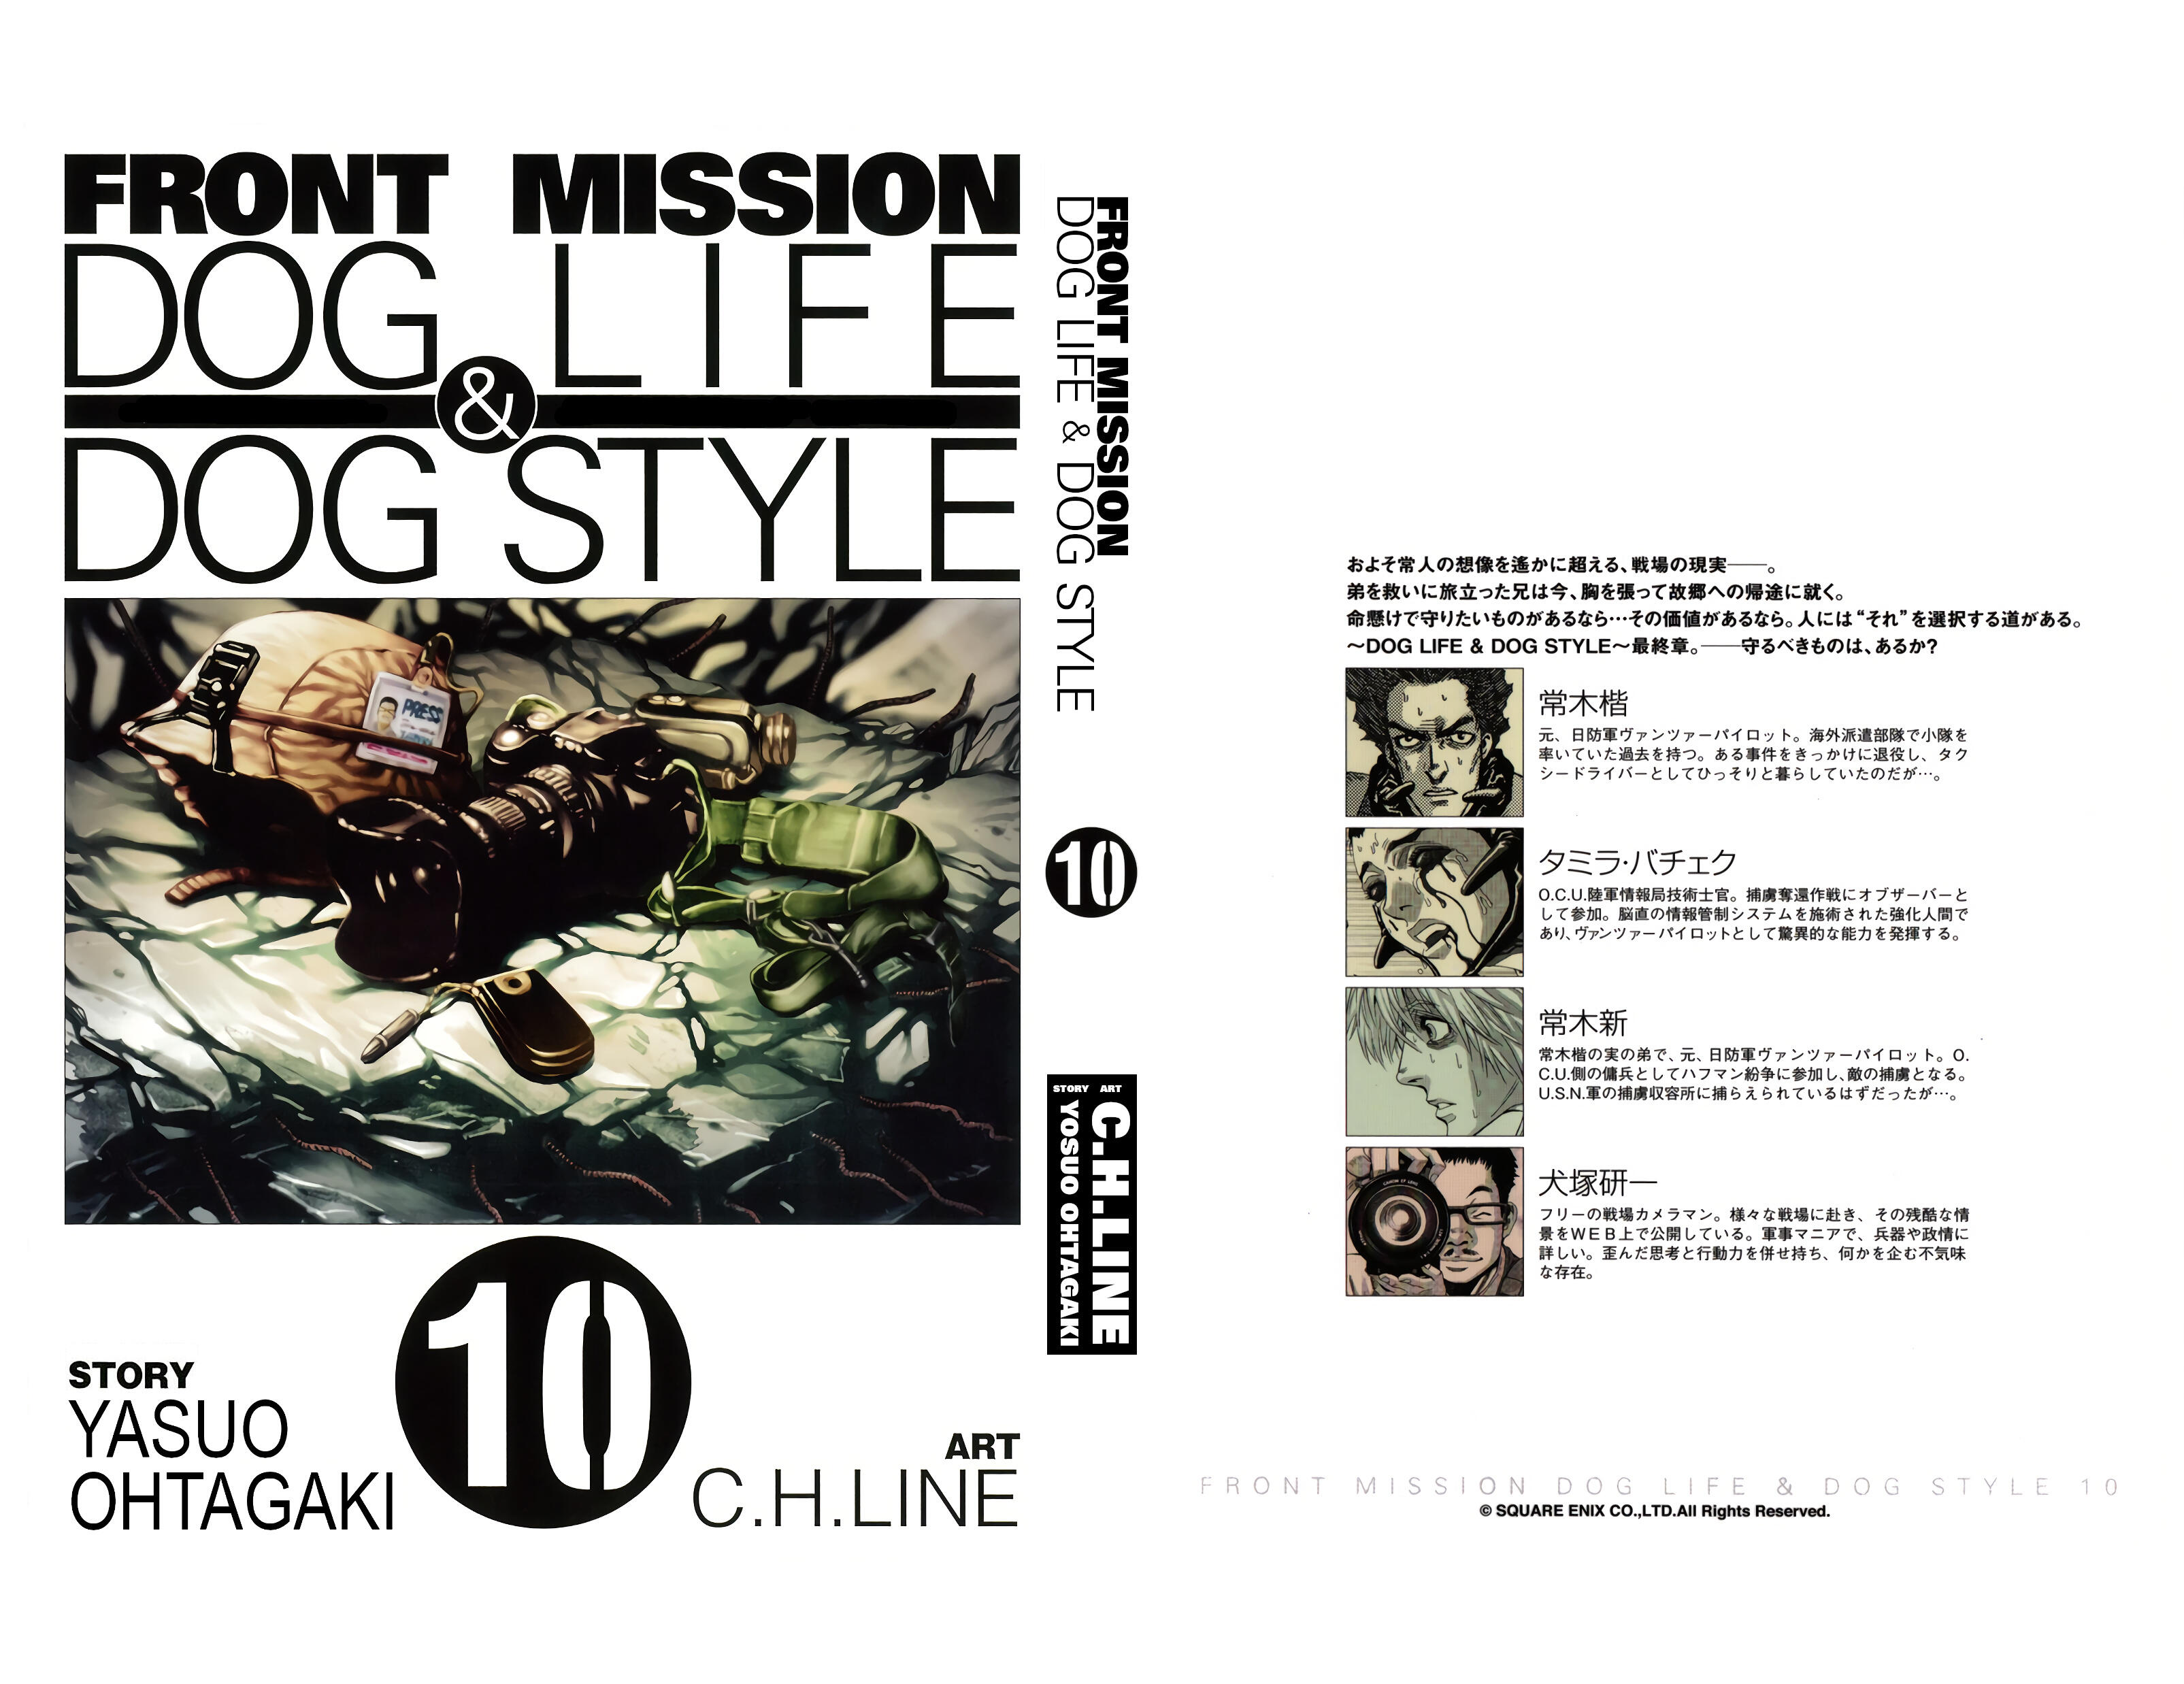 Front Mission Dog Life Dog Style Chapter 79 Read Front Mission Dog Life Dog Style Chapter 79 Online At Allmanga Us Page 1